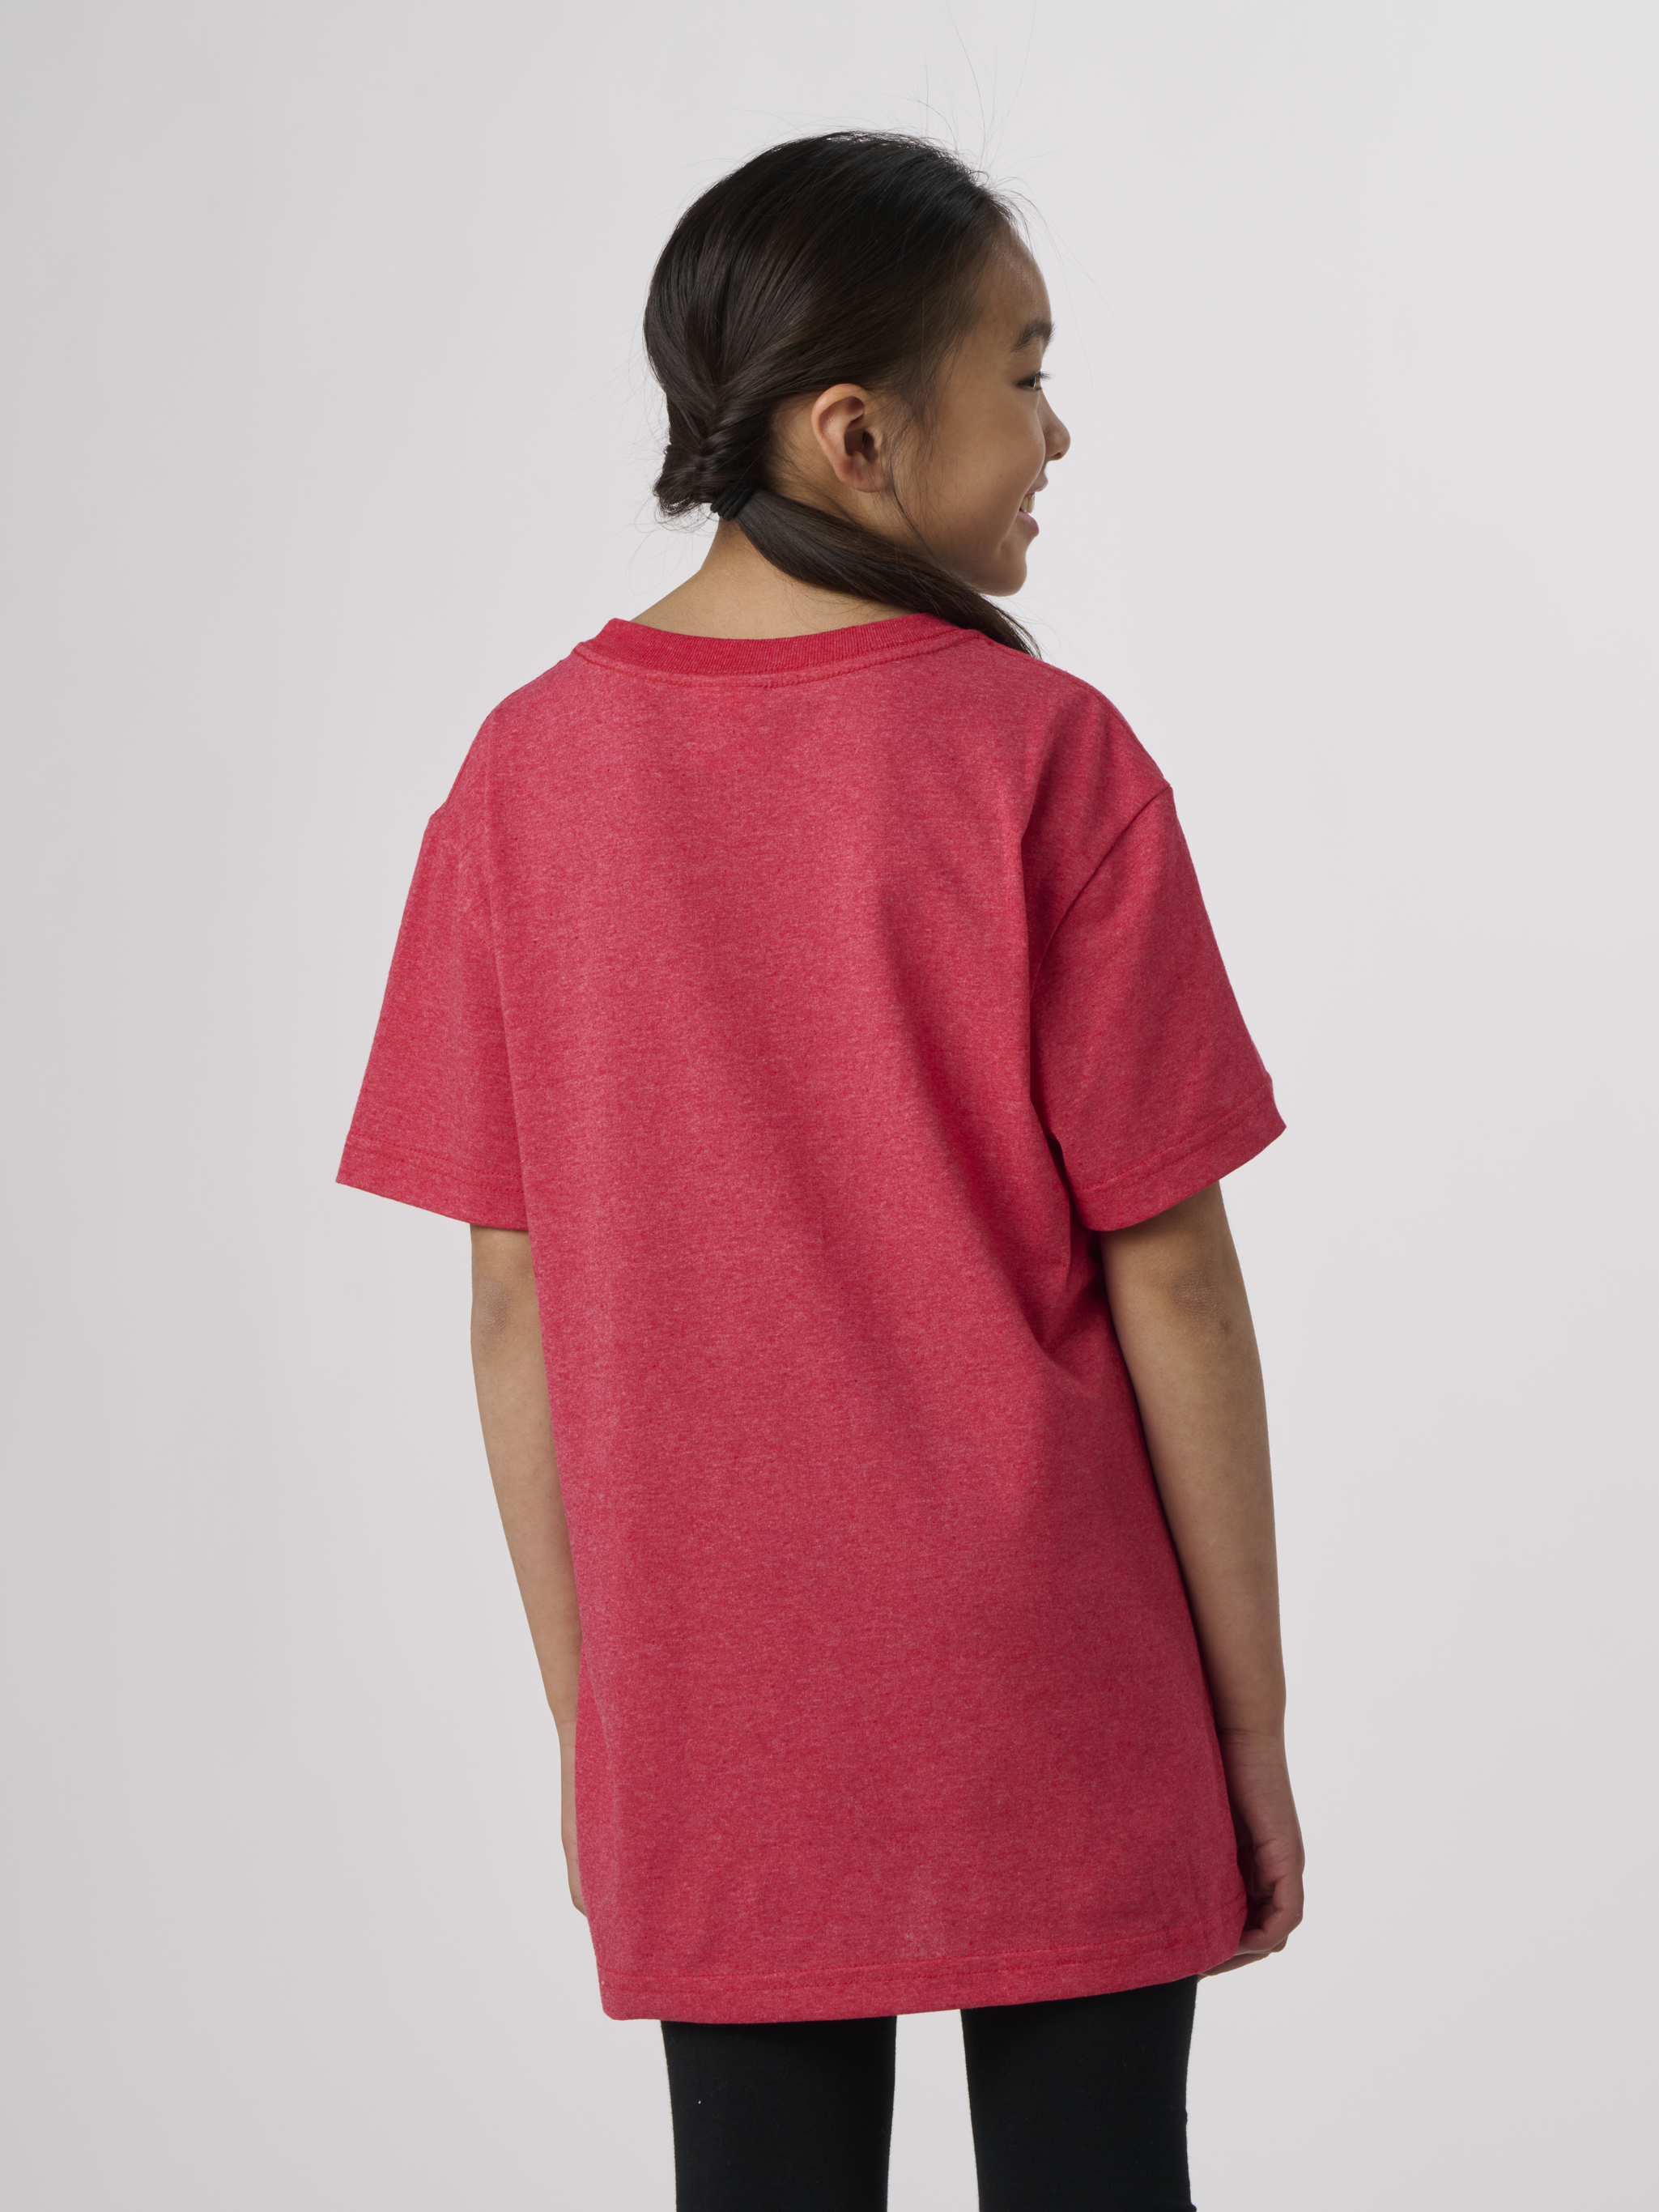 RECOVER_EY100_ECOYOUTHSHORTSLEEVETSHIRT_RUBY_BACK.png